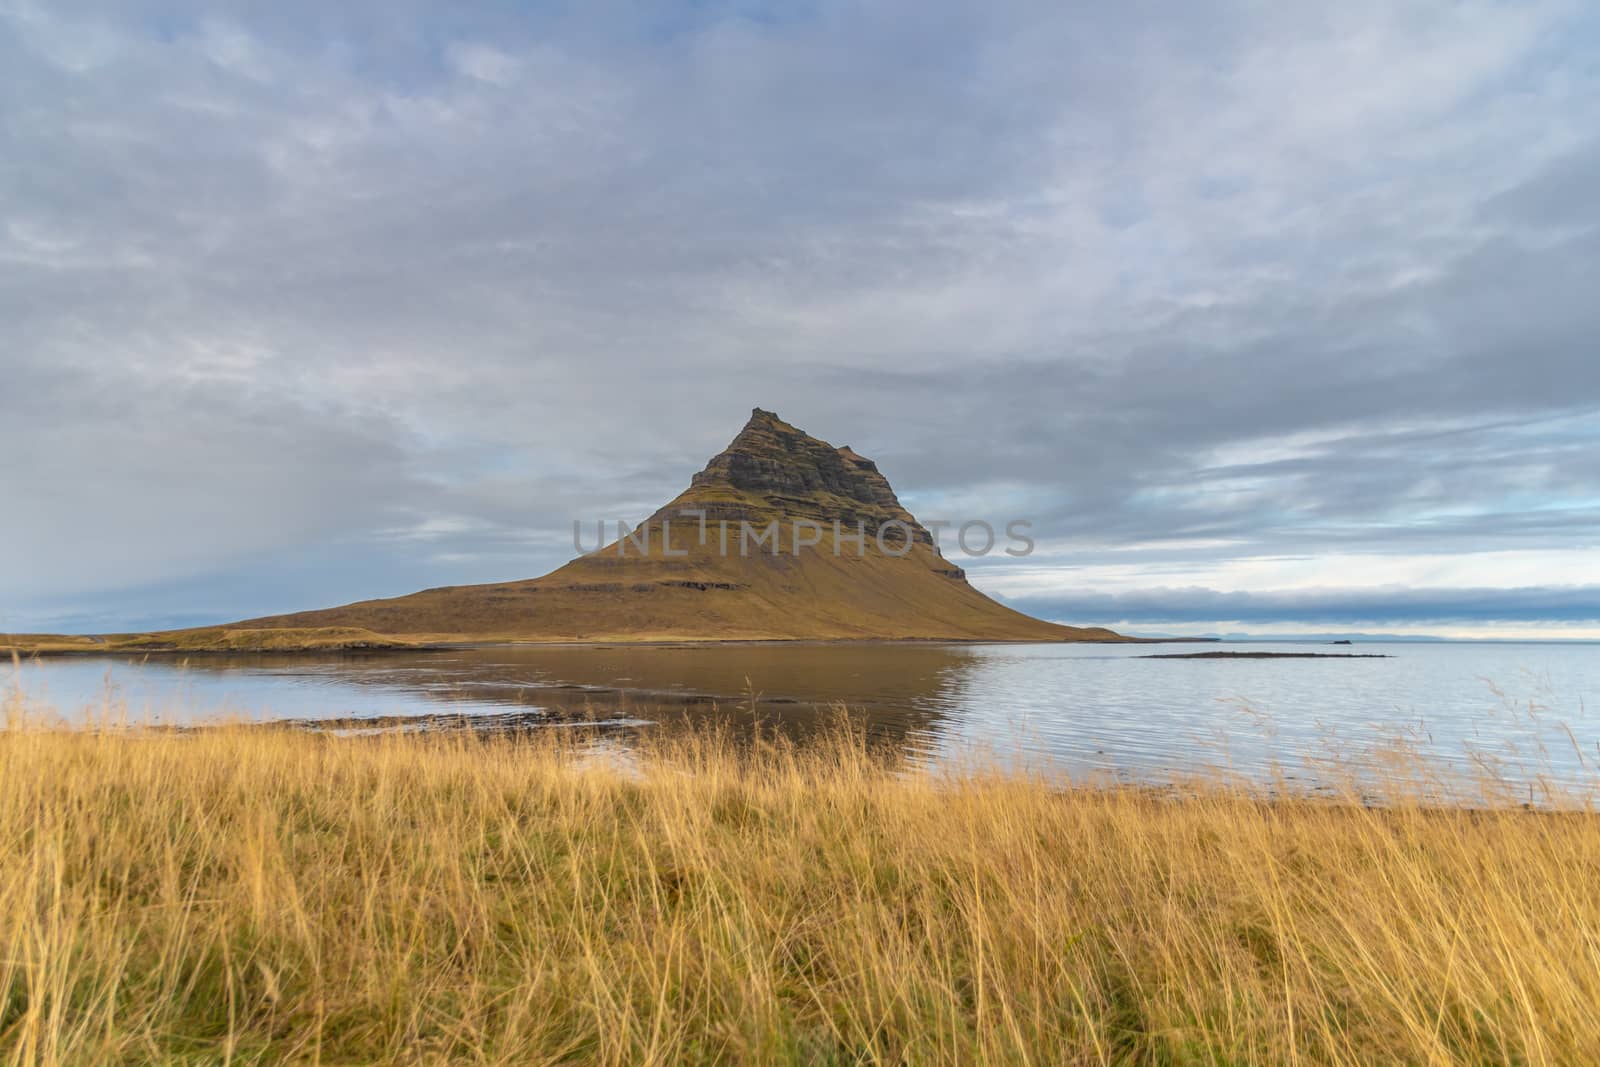 Kirkjufell in Iceland famous mountain reflecting in lake during stormy day by MXW_Stock